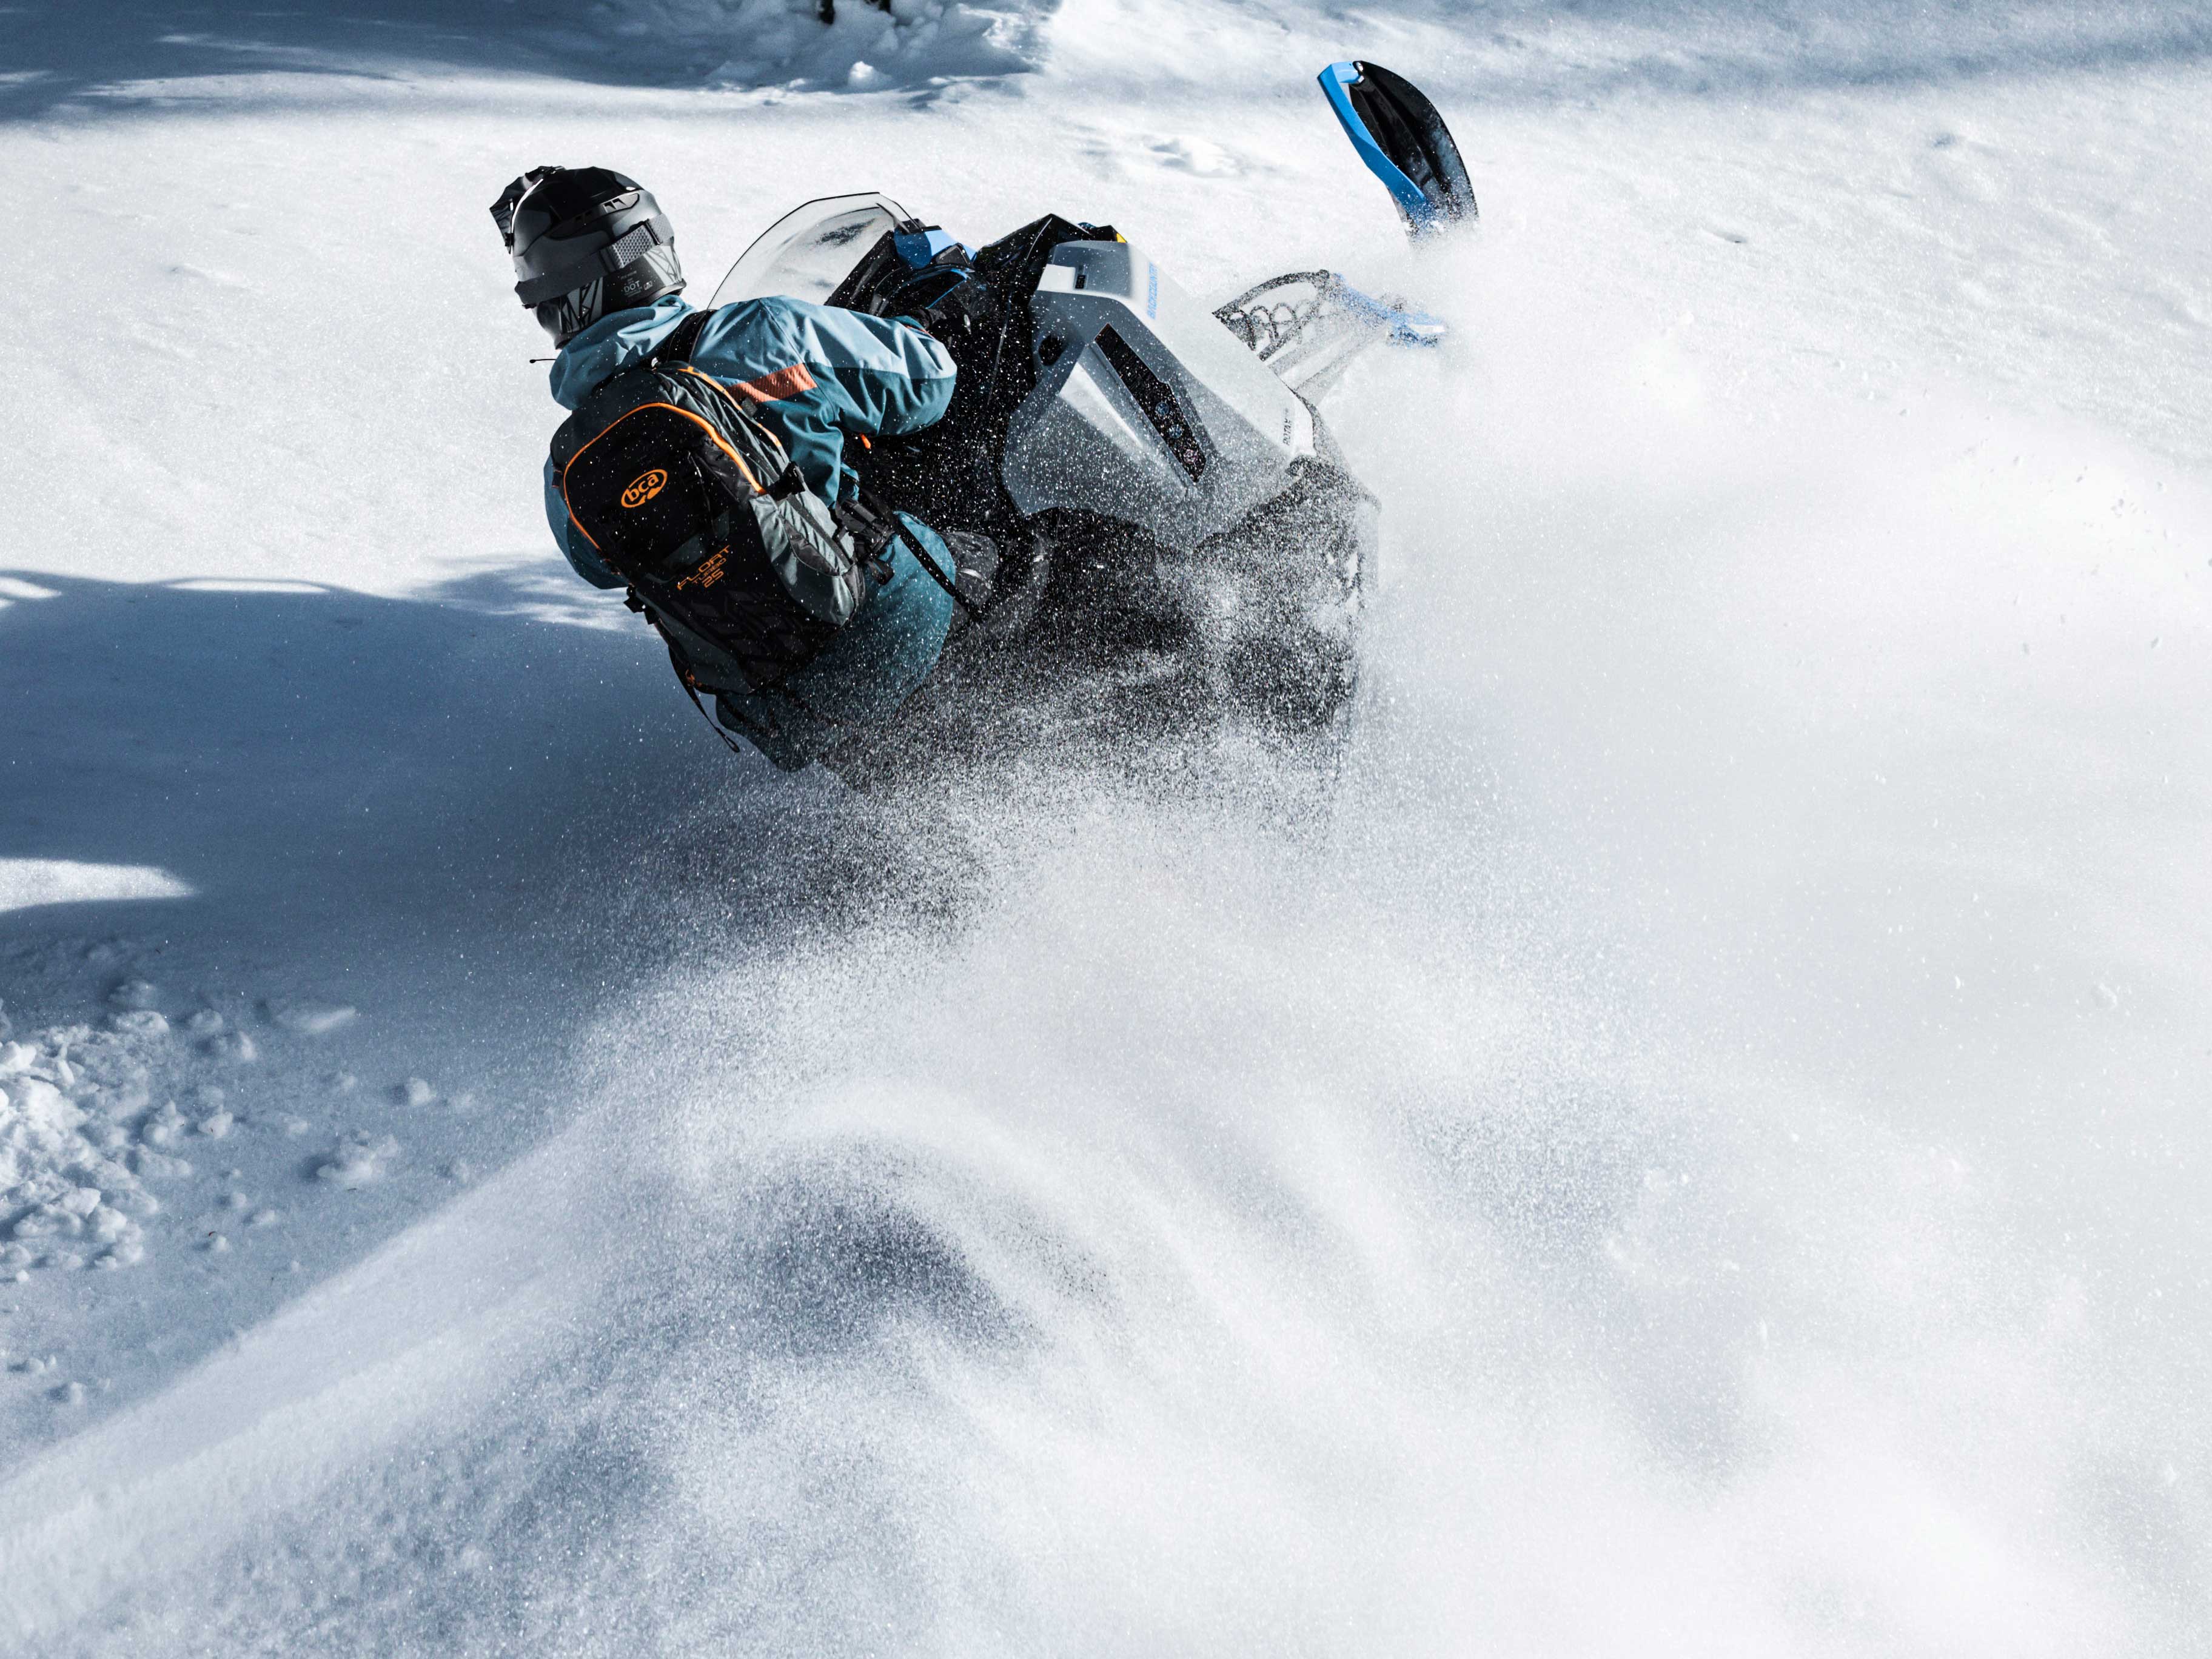 Man carving Powder with a 2022 Ski-Doo Backcountry.